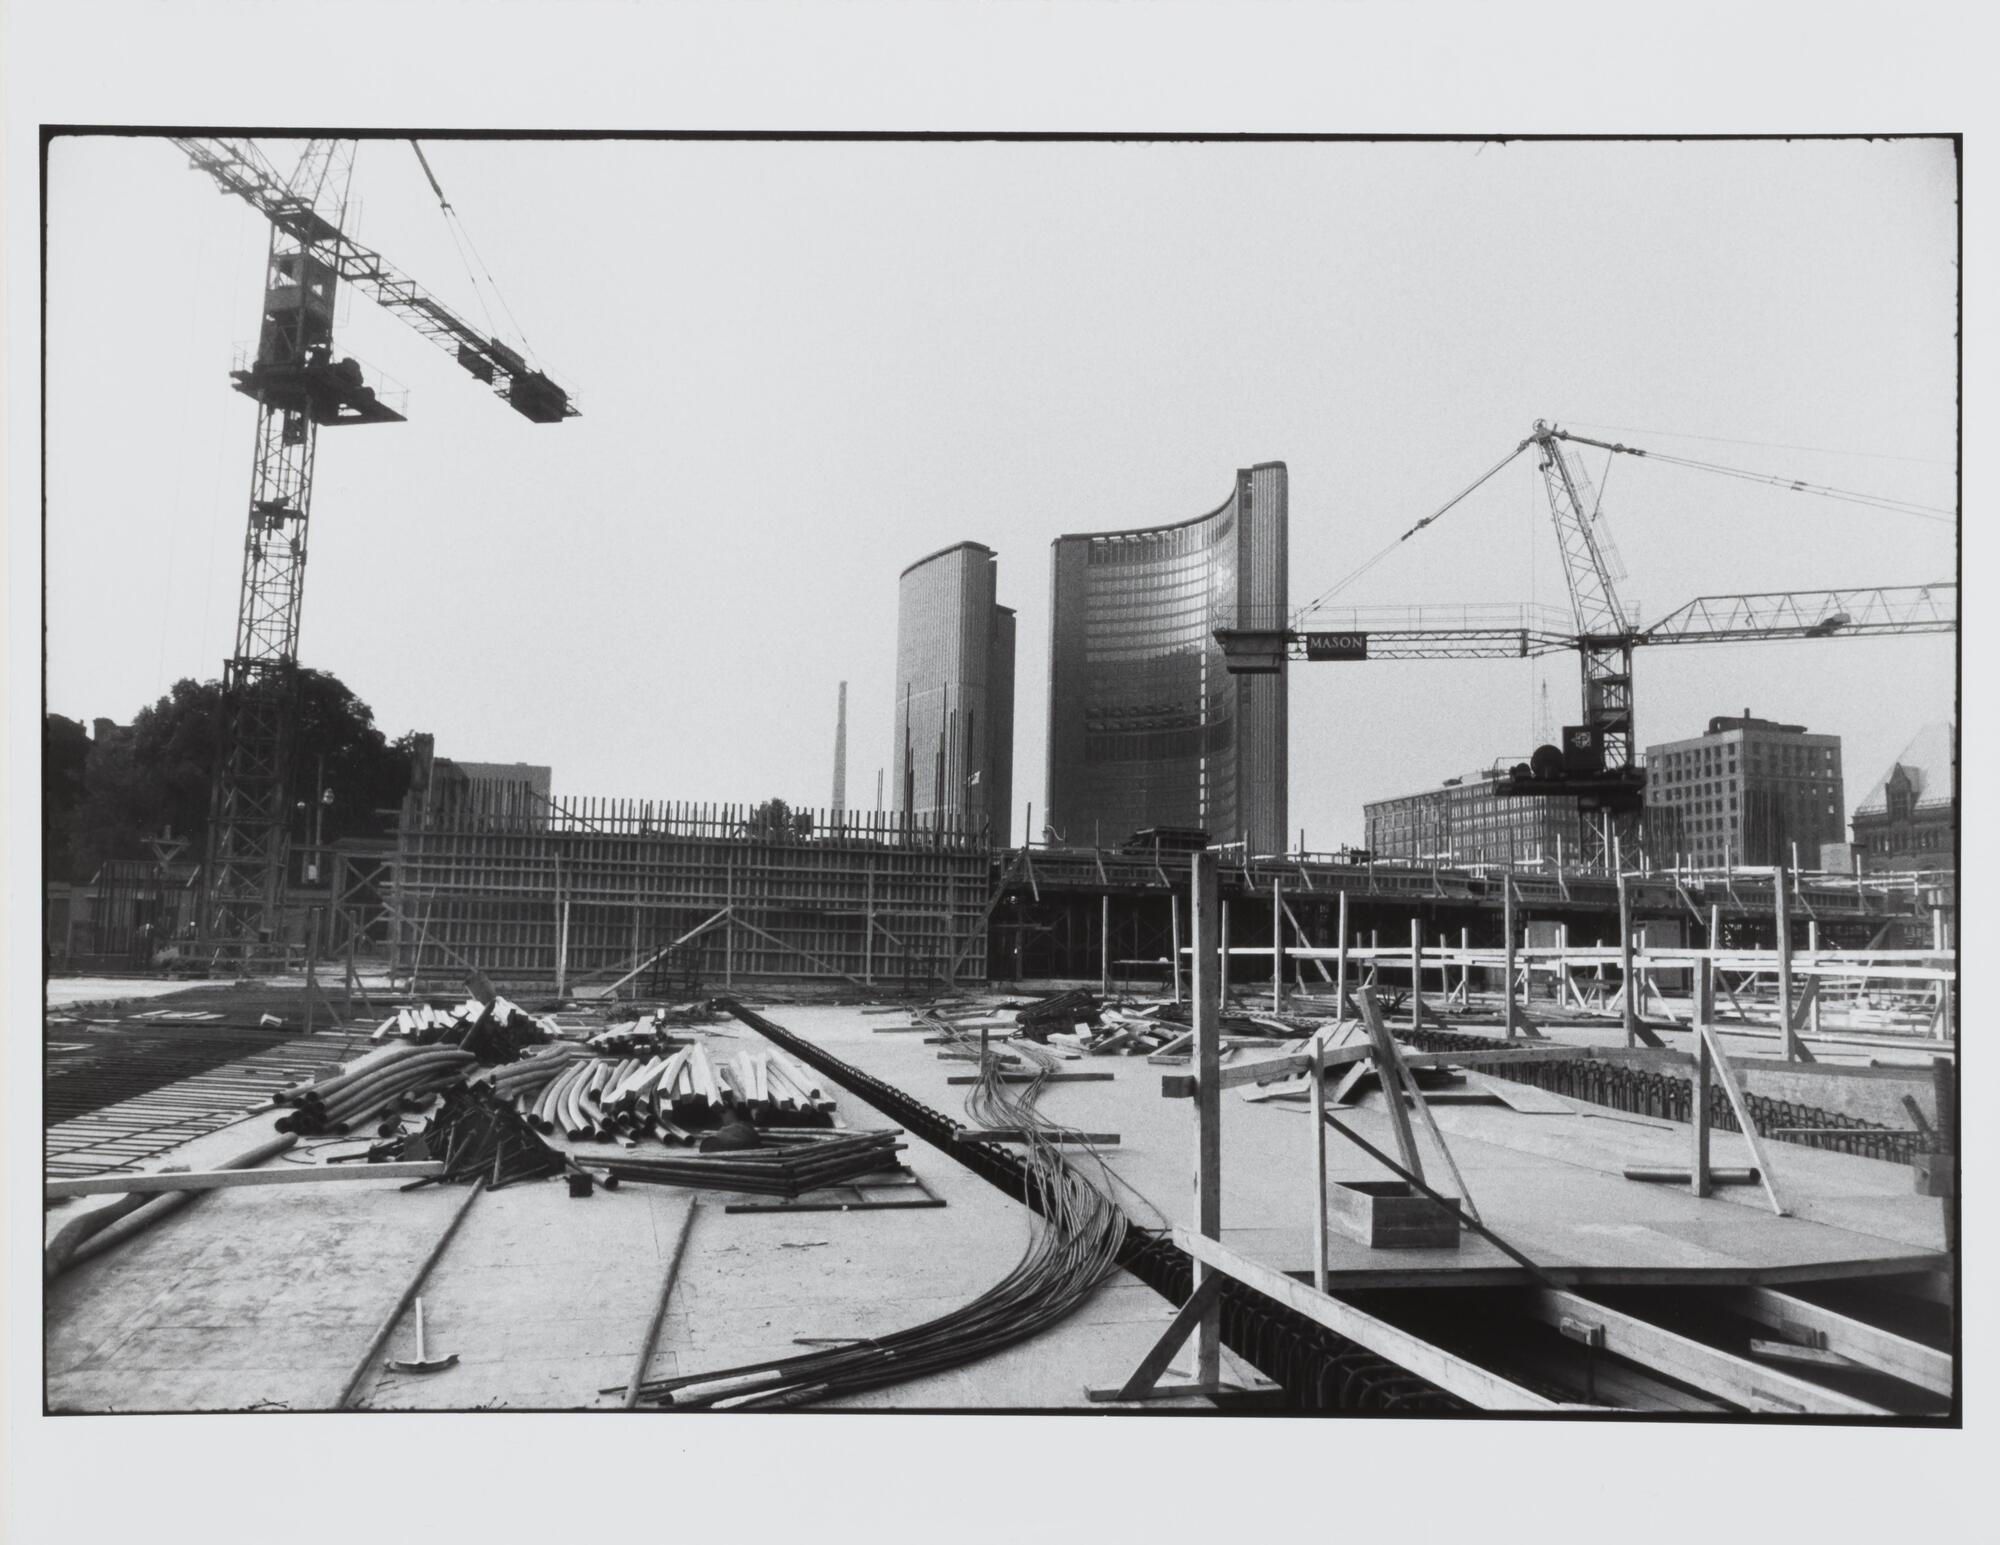 This photograph depicts a view of the construction site of a large building. There are piles of materials, two towering cranes and a view of other buildings in the background.